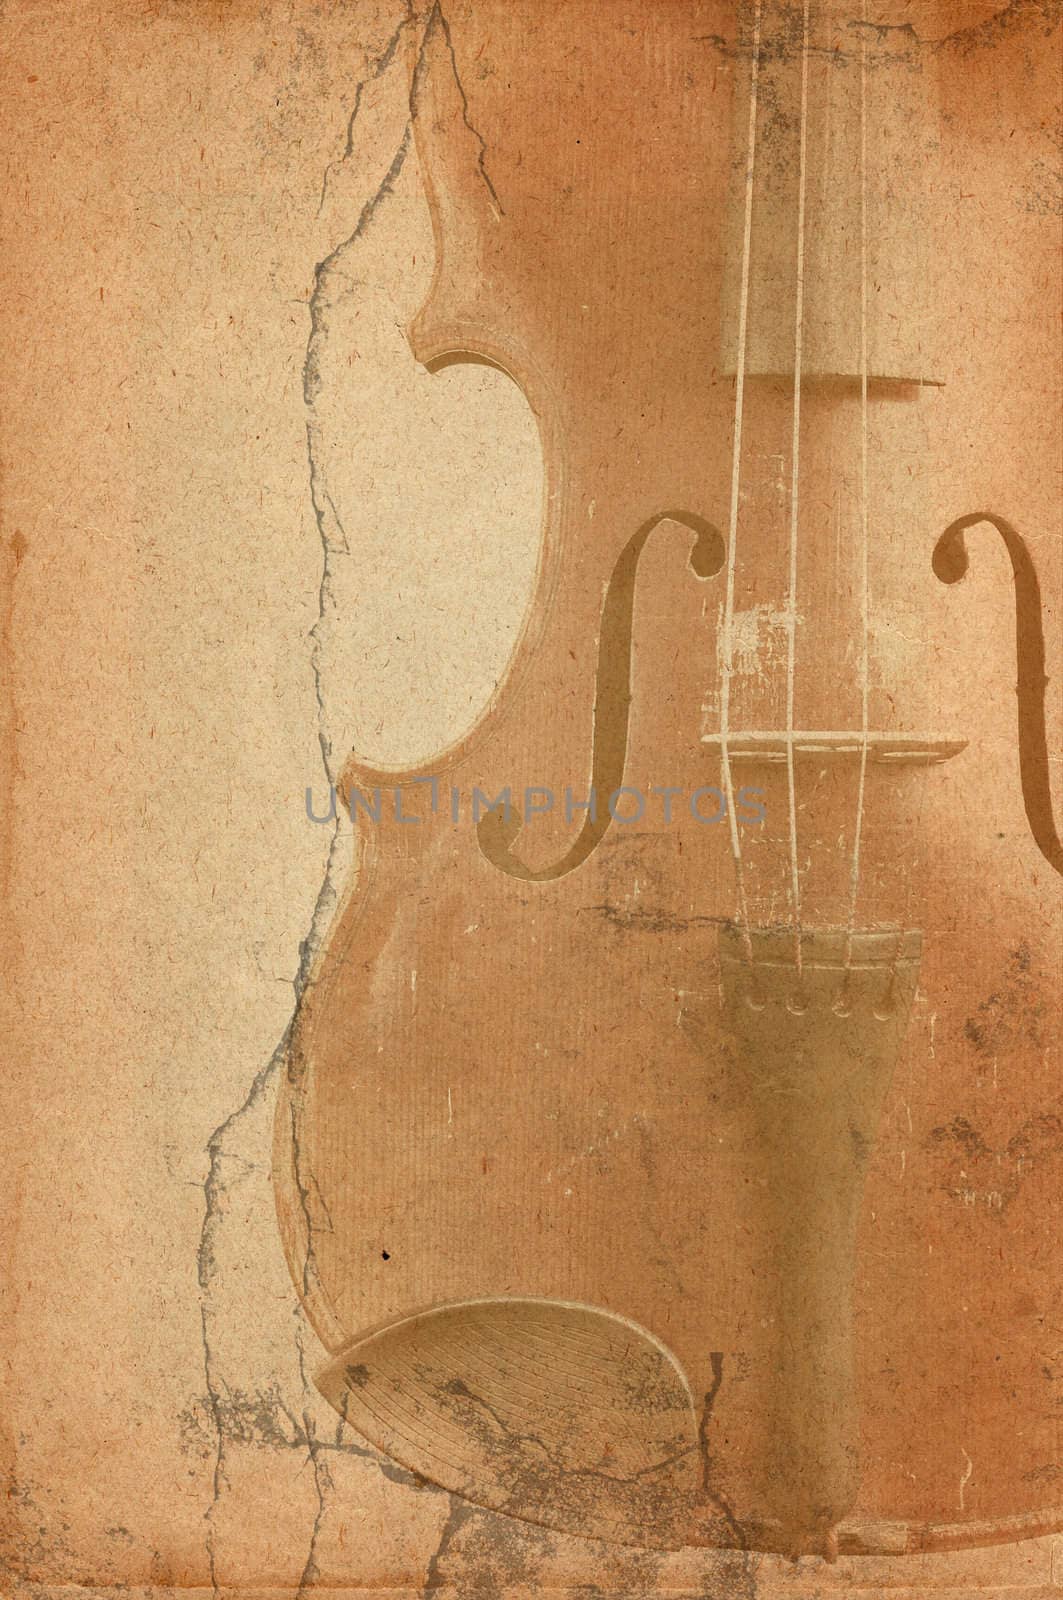 music background with old fiddle in grunge style by Mibuch